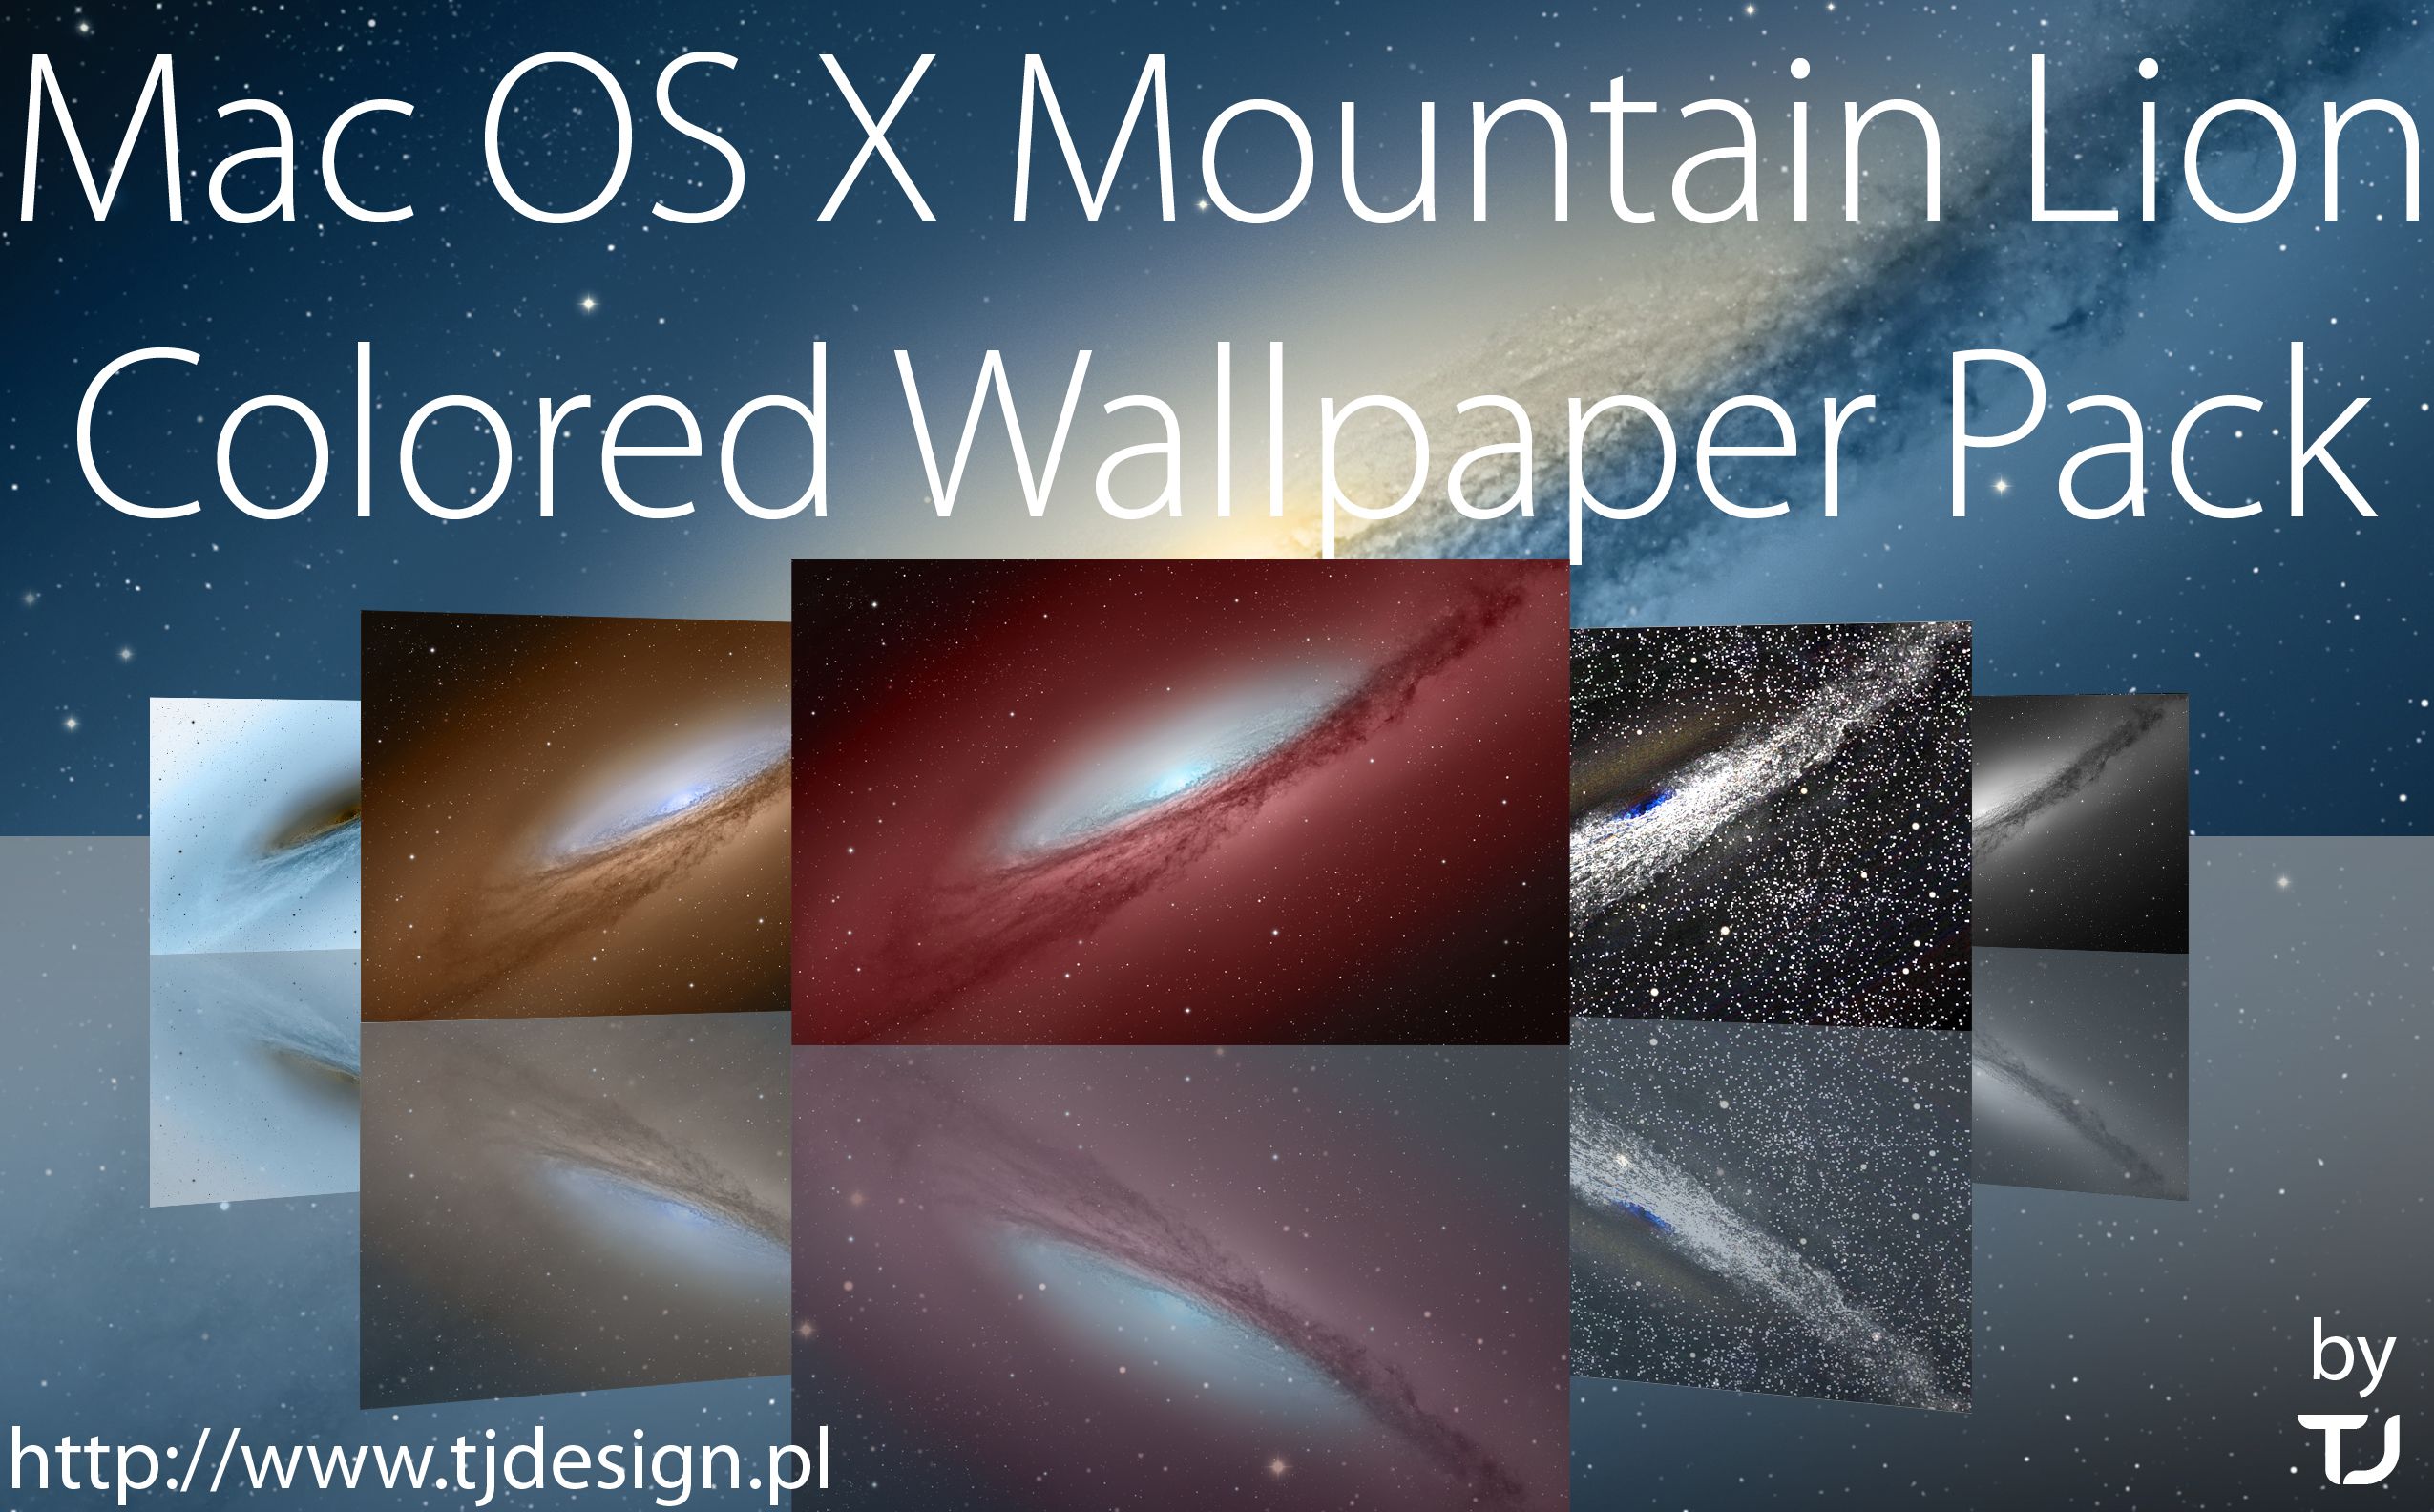 Mac OS X Mountain Lion Colored Wallpaper Pack by T0j on DeviantArt